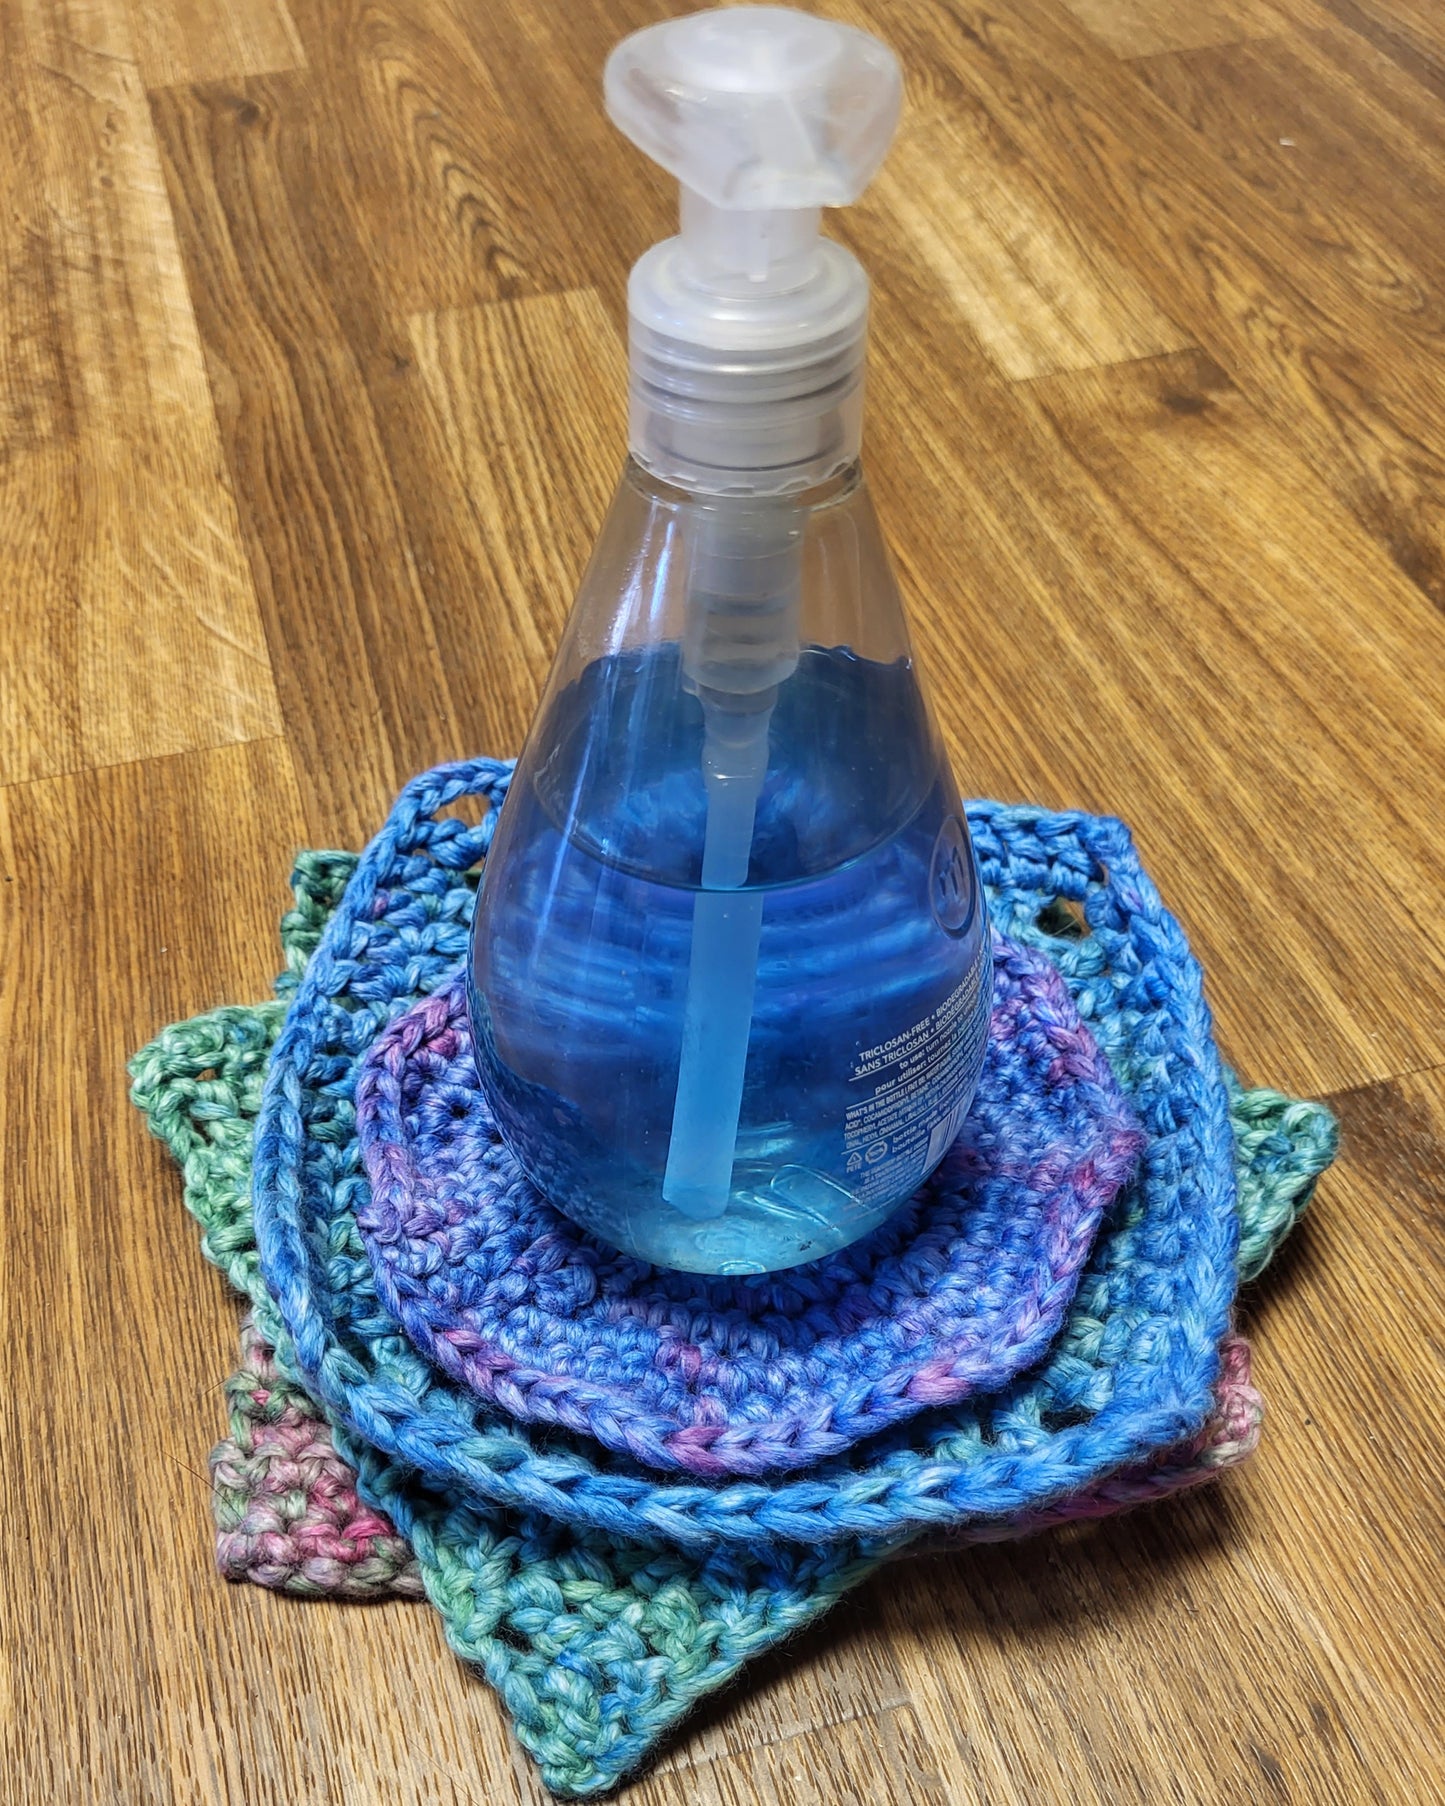 Crochet for Beginners (Friday, 4/26, 5/3, 5/10, 5/17, 5pm - 6:30pm)